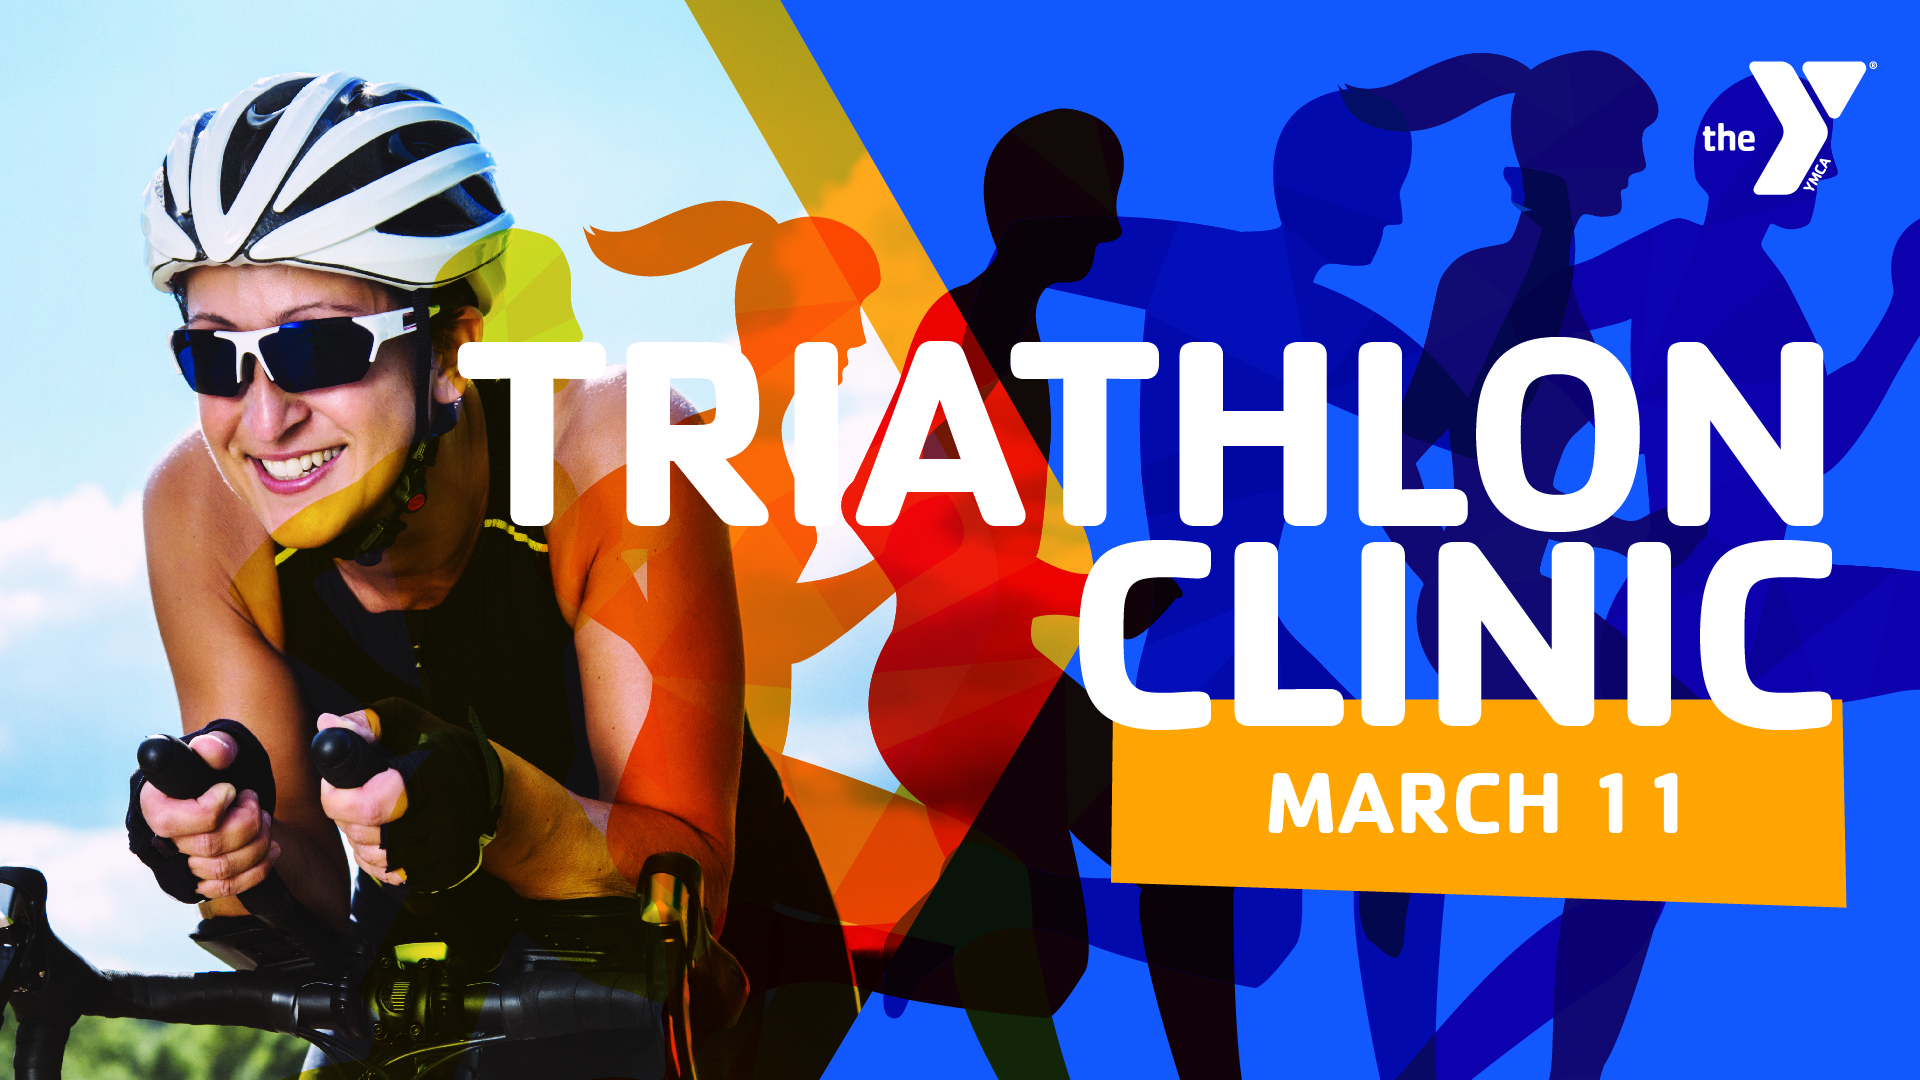 Featured image for “Triathlon Clinic”